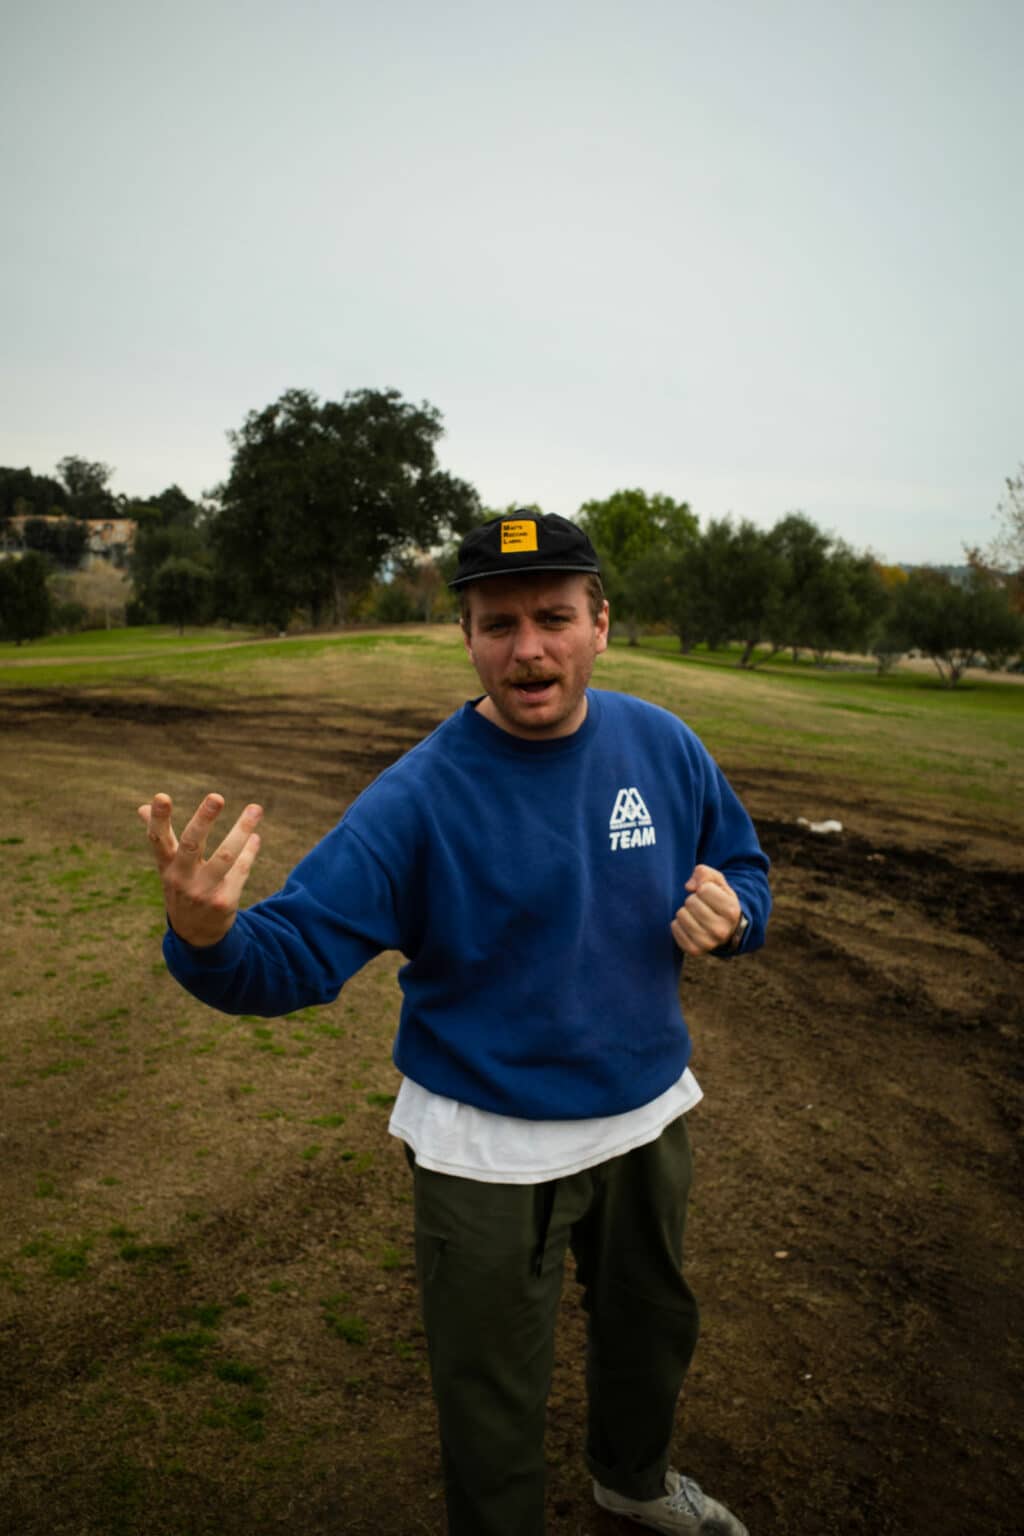 man sings in field with a black cap on and a blue sweatshirt.